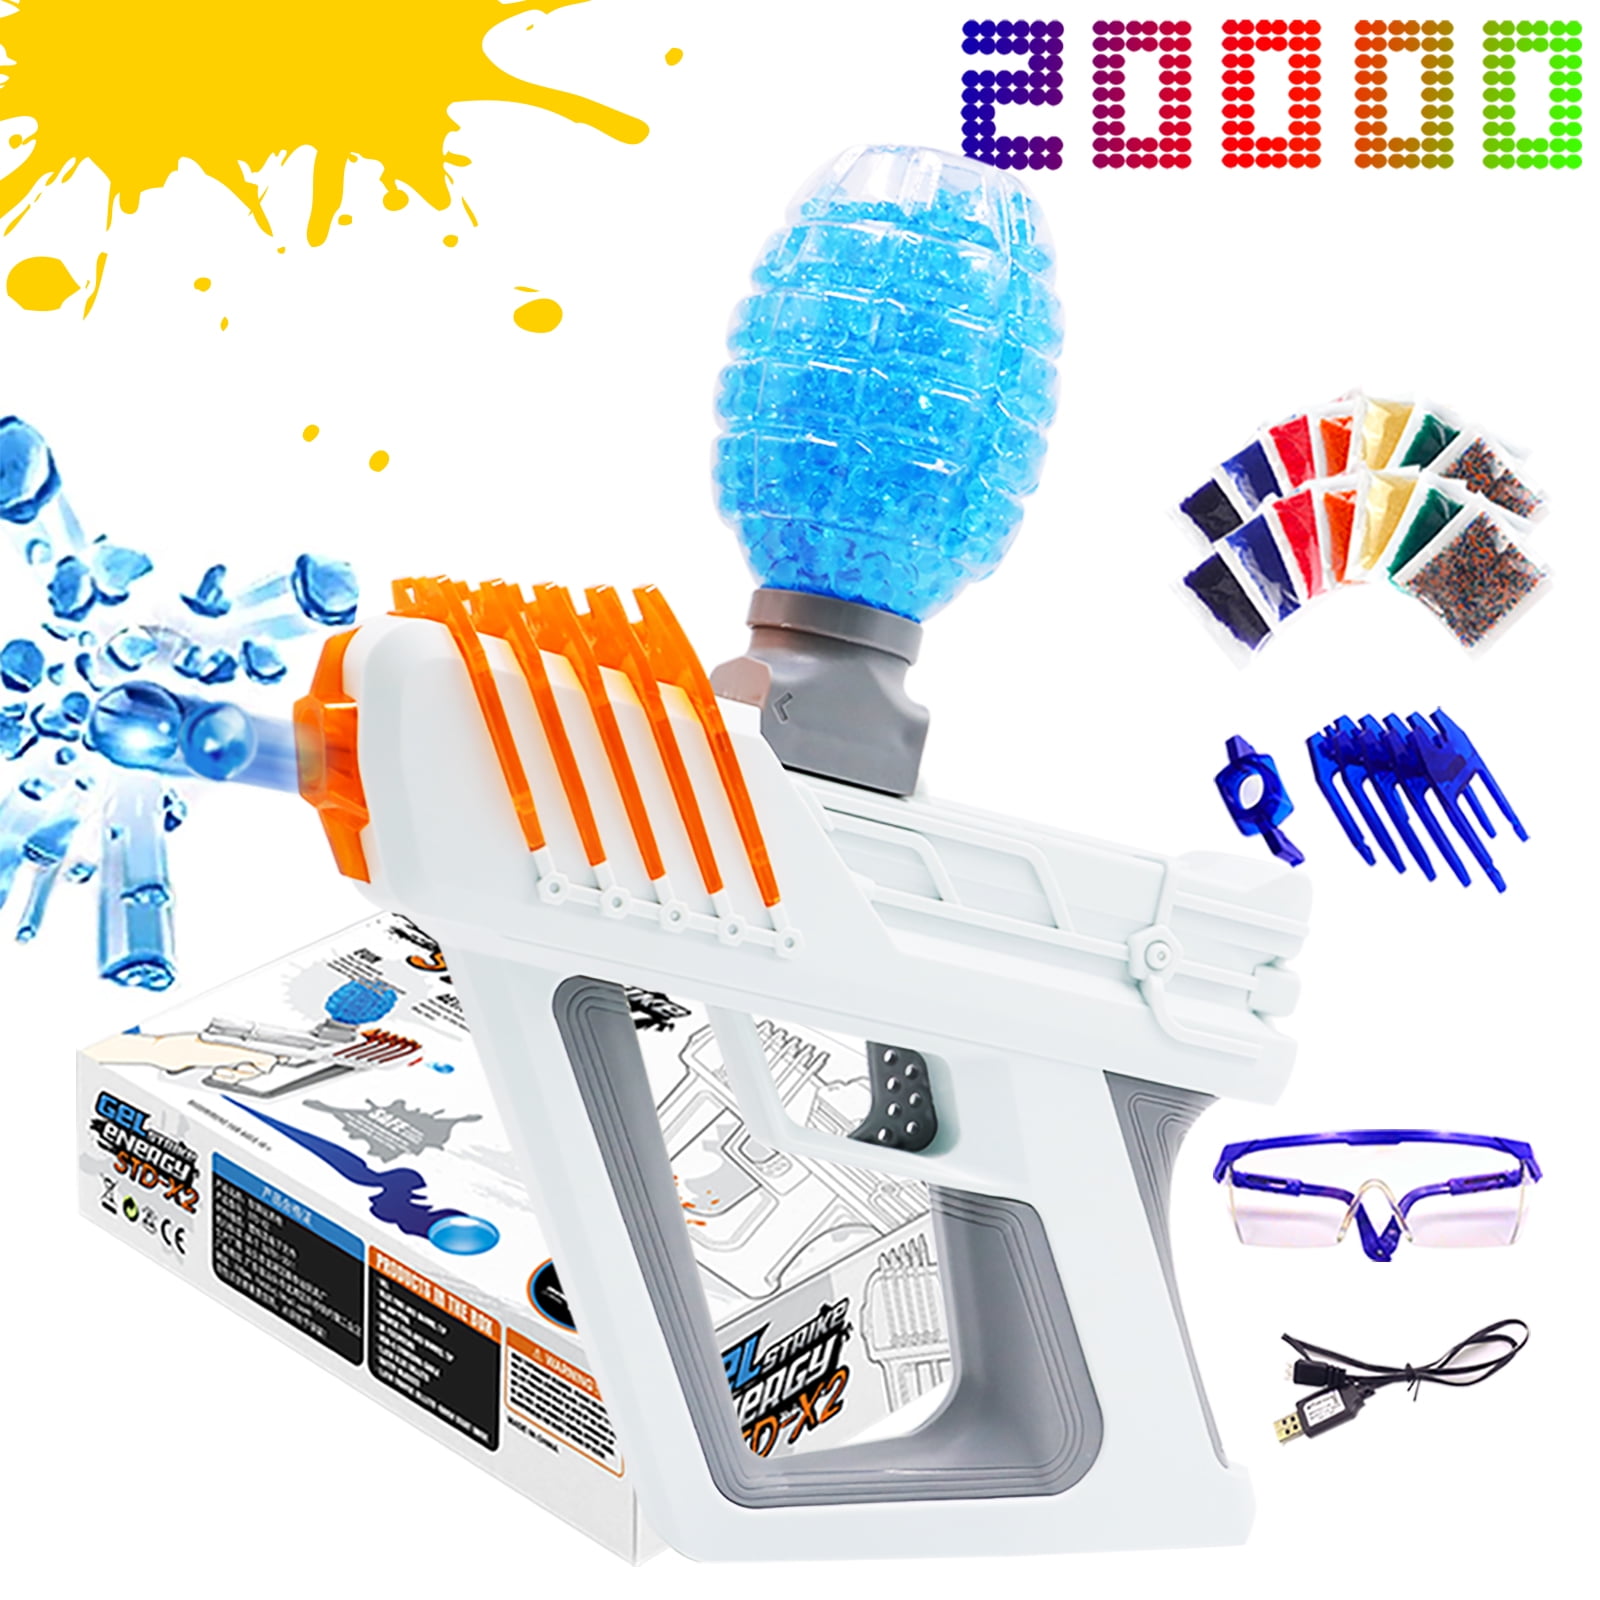 Gel Blaster Foam Blaster Toy Gun with Semi- and Fully-Automatic Modes,  Includes 10,000 Eco-Friendly Gellets in the Kids Play Toys department at